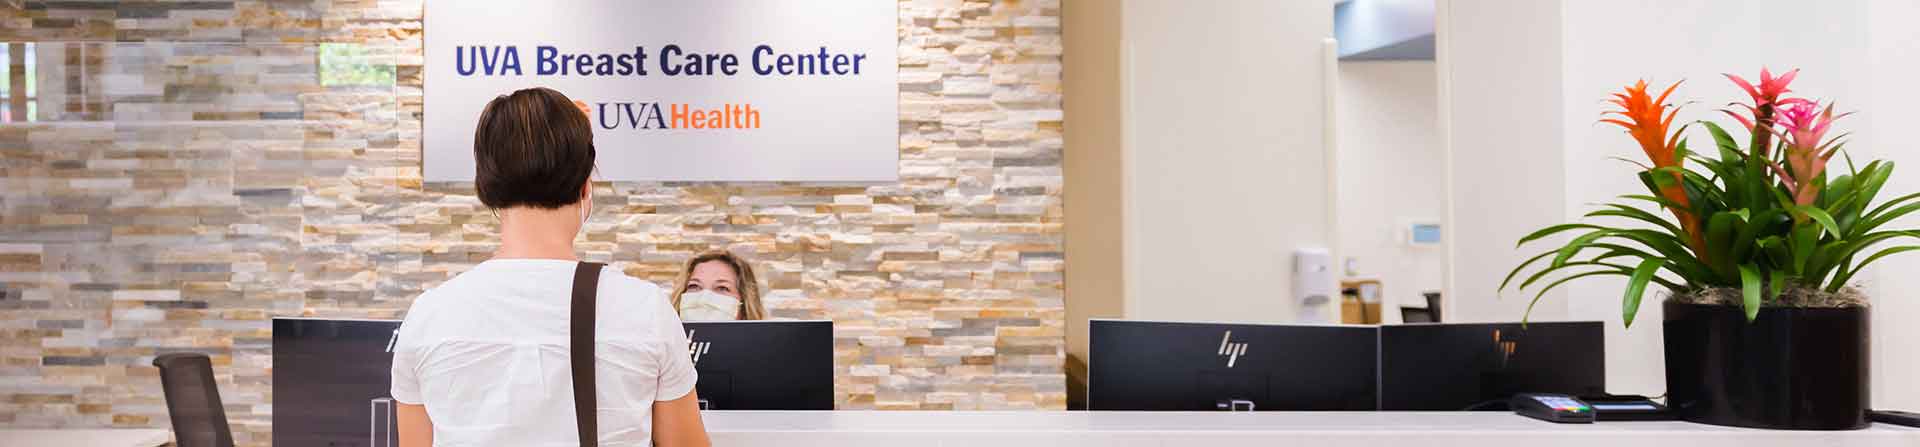 patient checks in for breast cancer care at the welcome desk